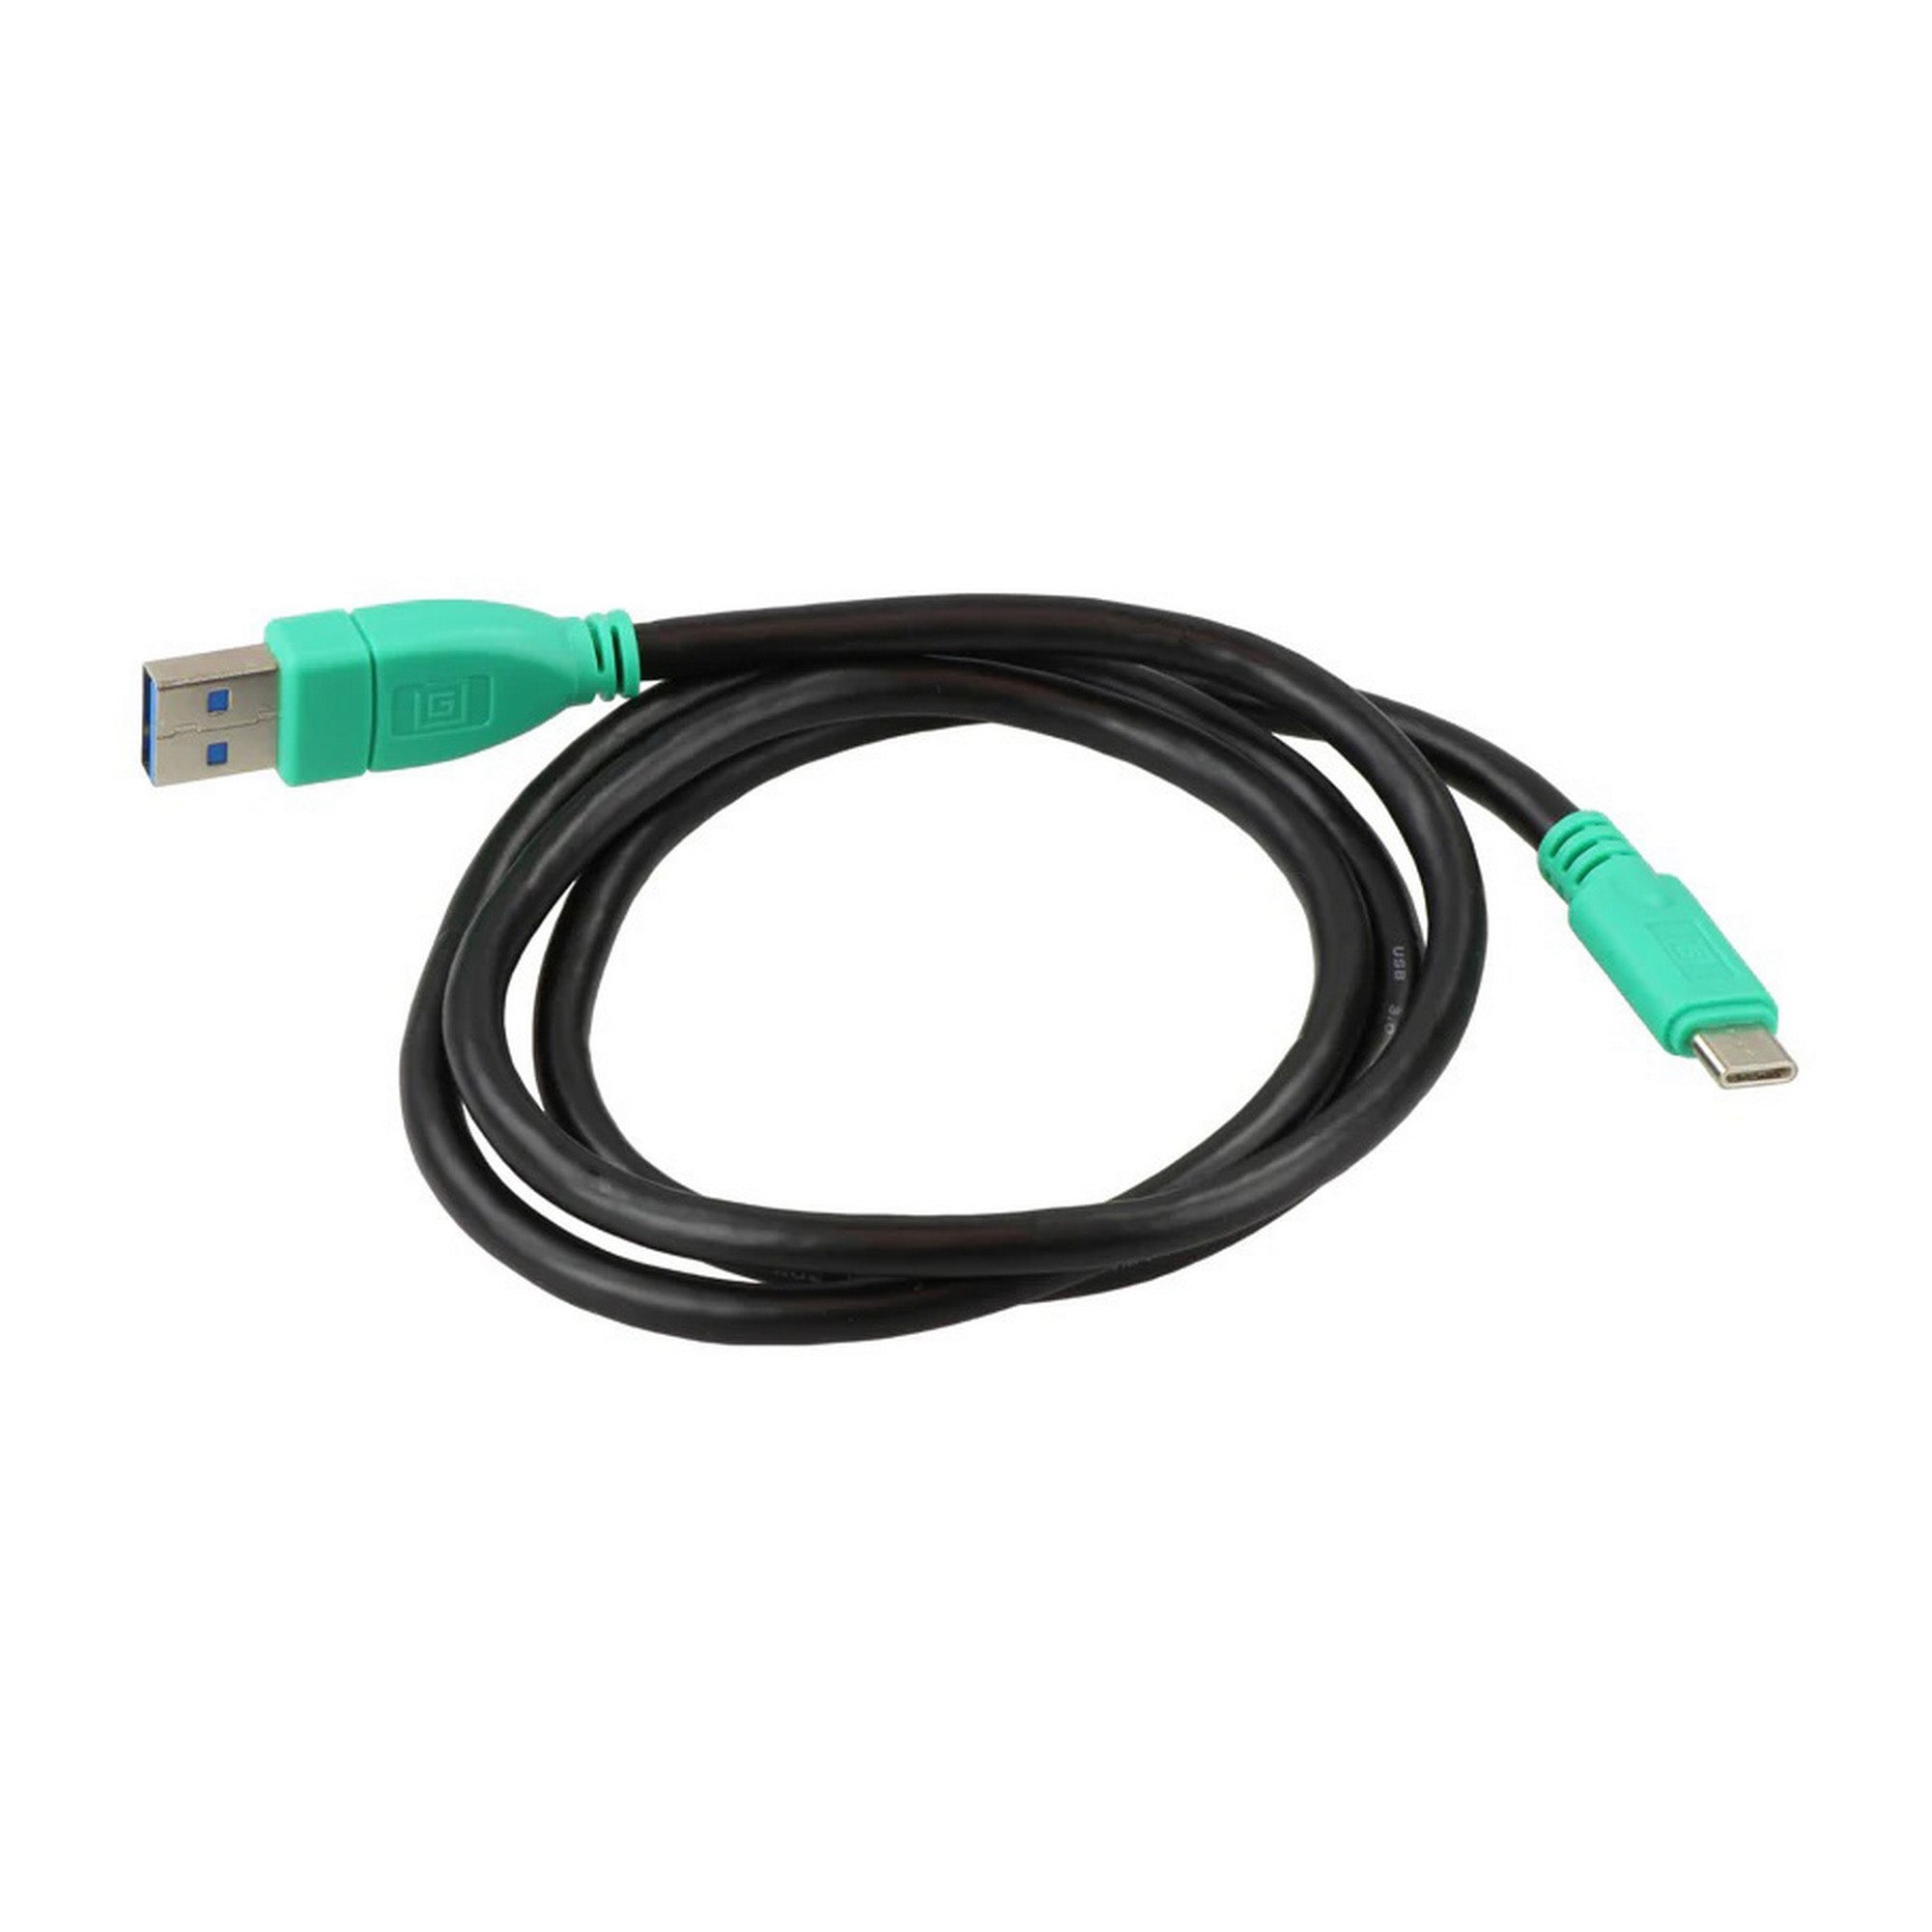 RAM GDS Genuine USB-A to USB-C 3.0 Cable